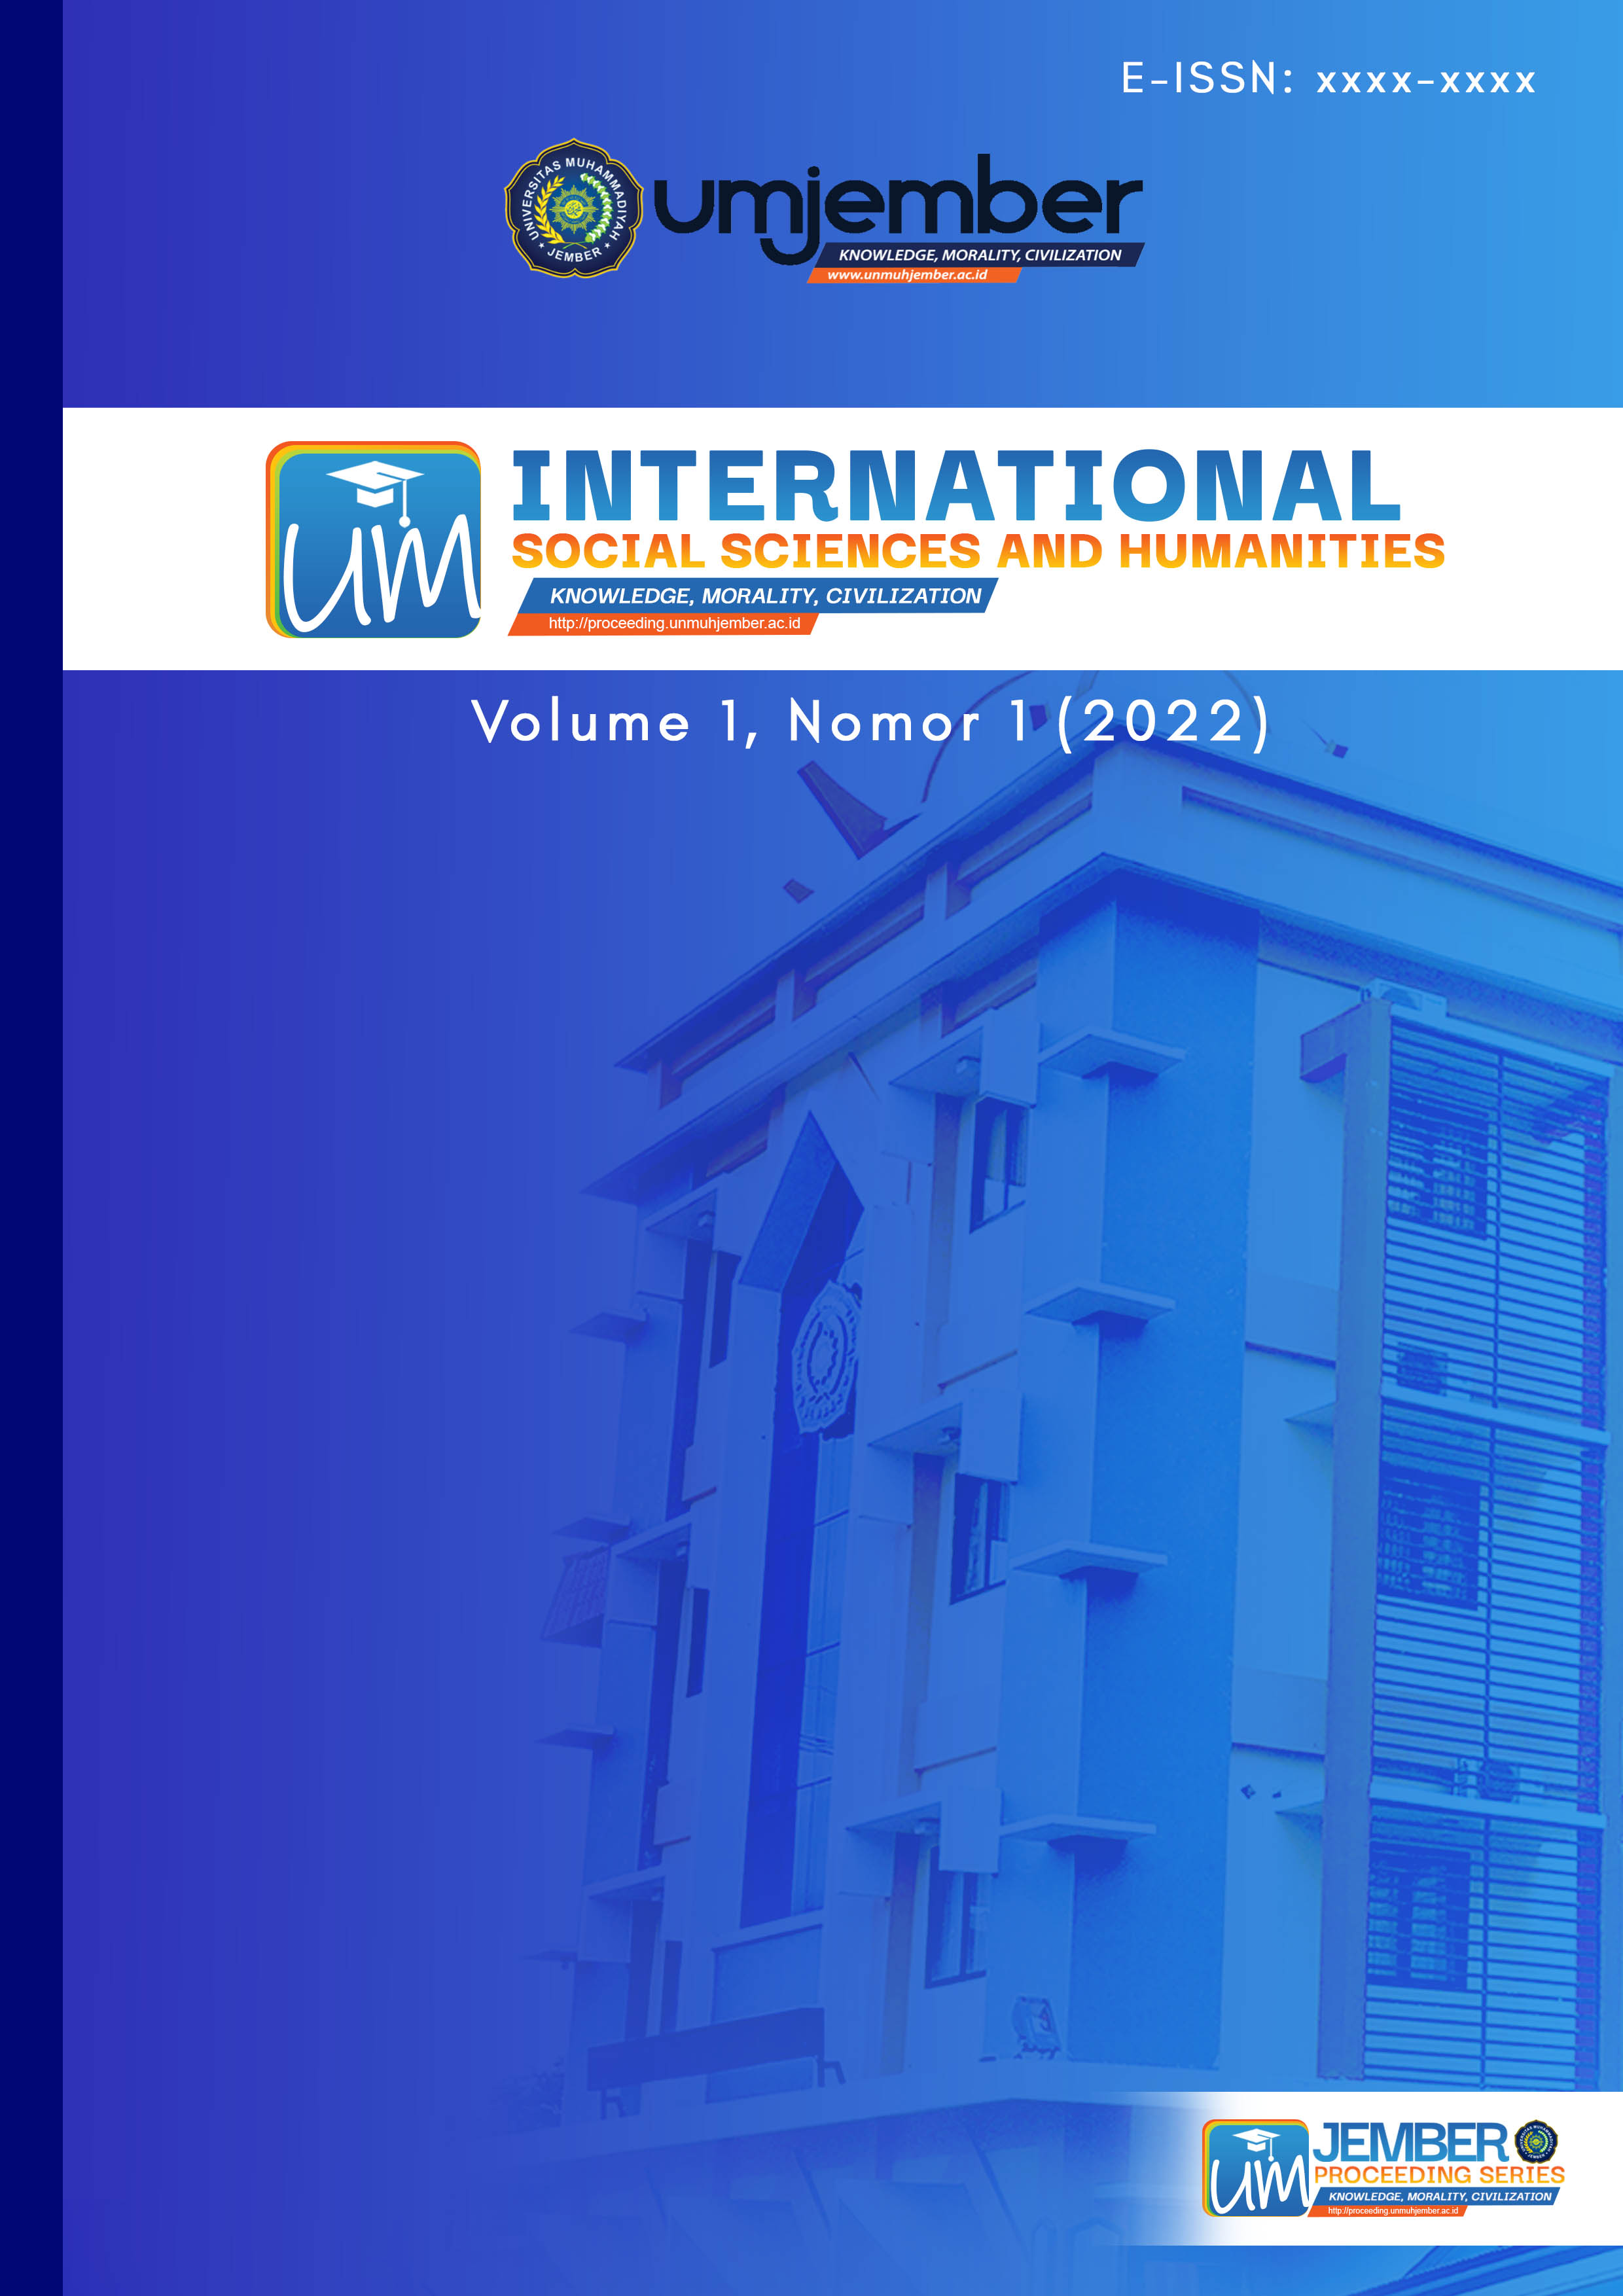 					View Vol. 1 No. 1 (2022): Proceedings of International Conference on Rural Development (ICRD) 2020
				